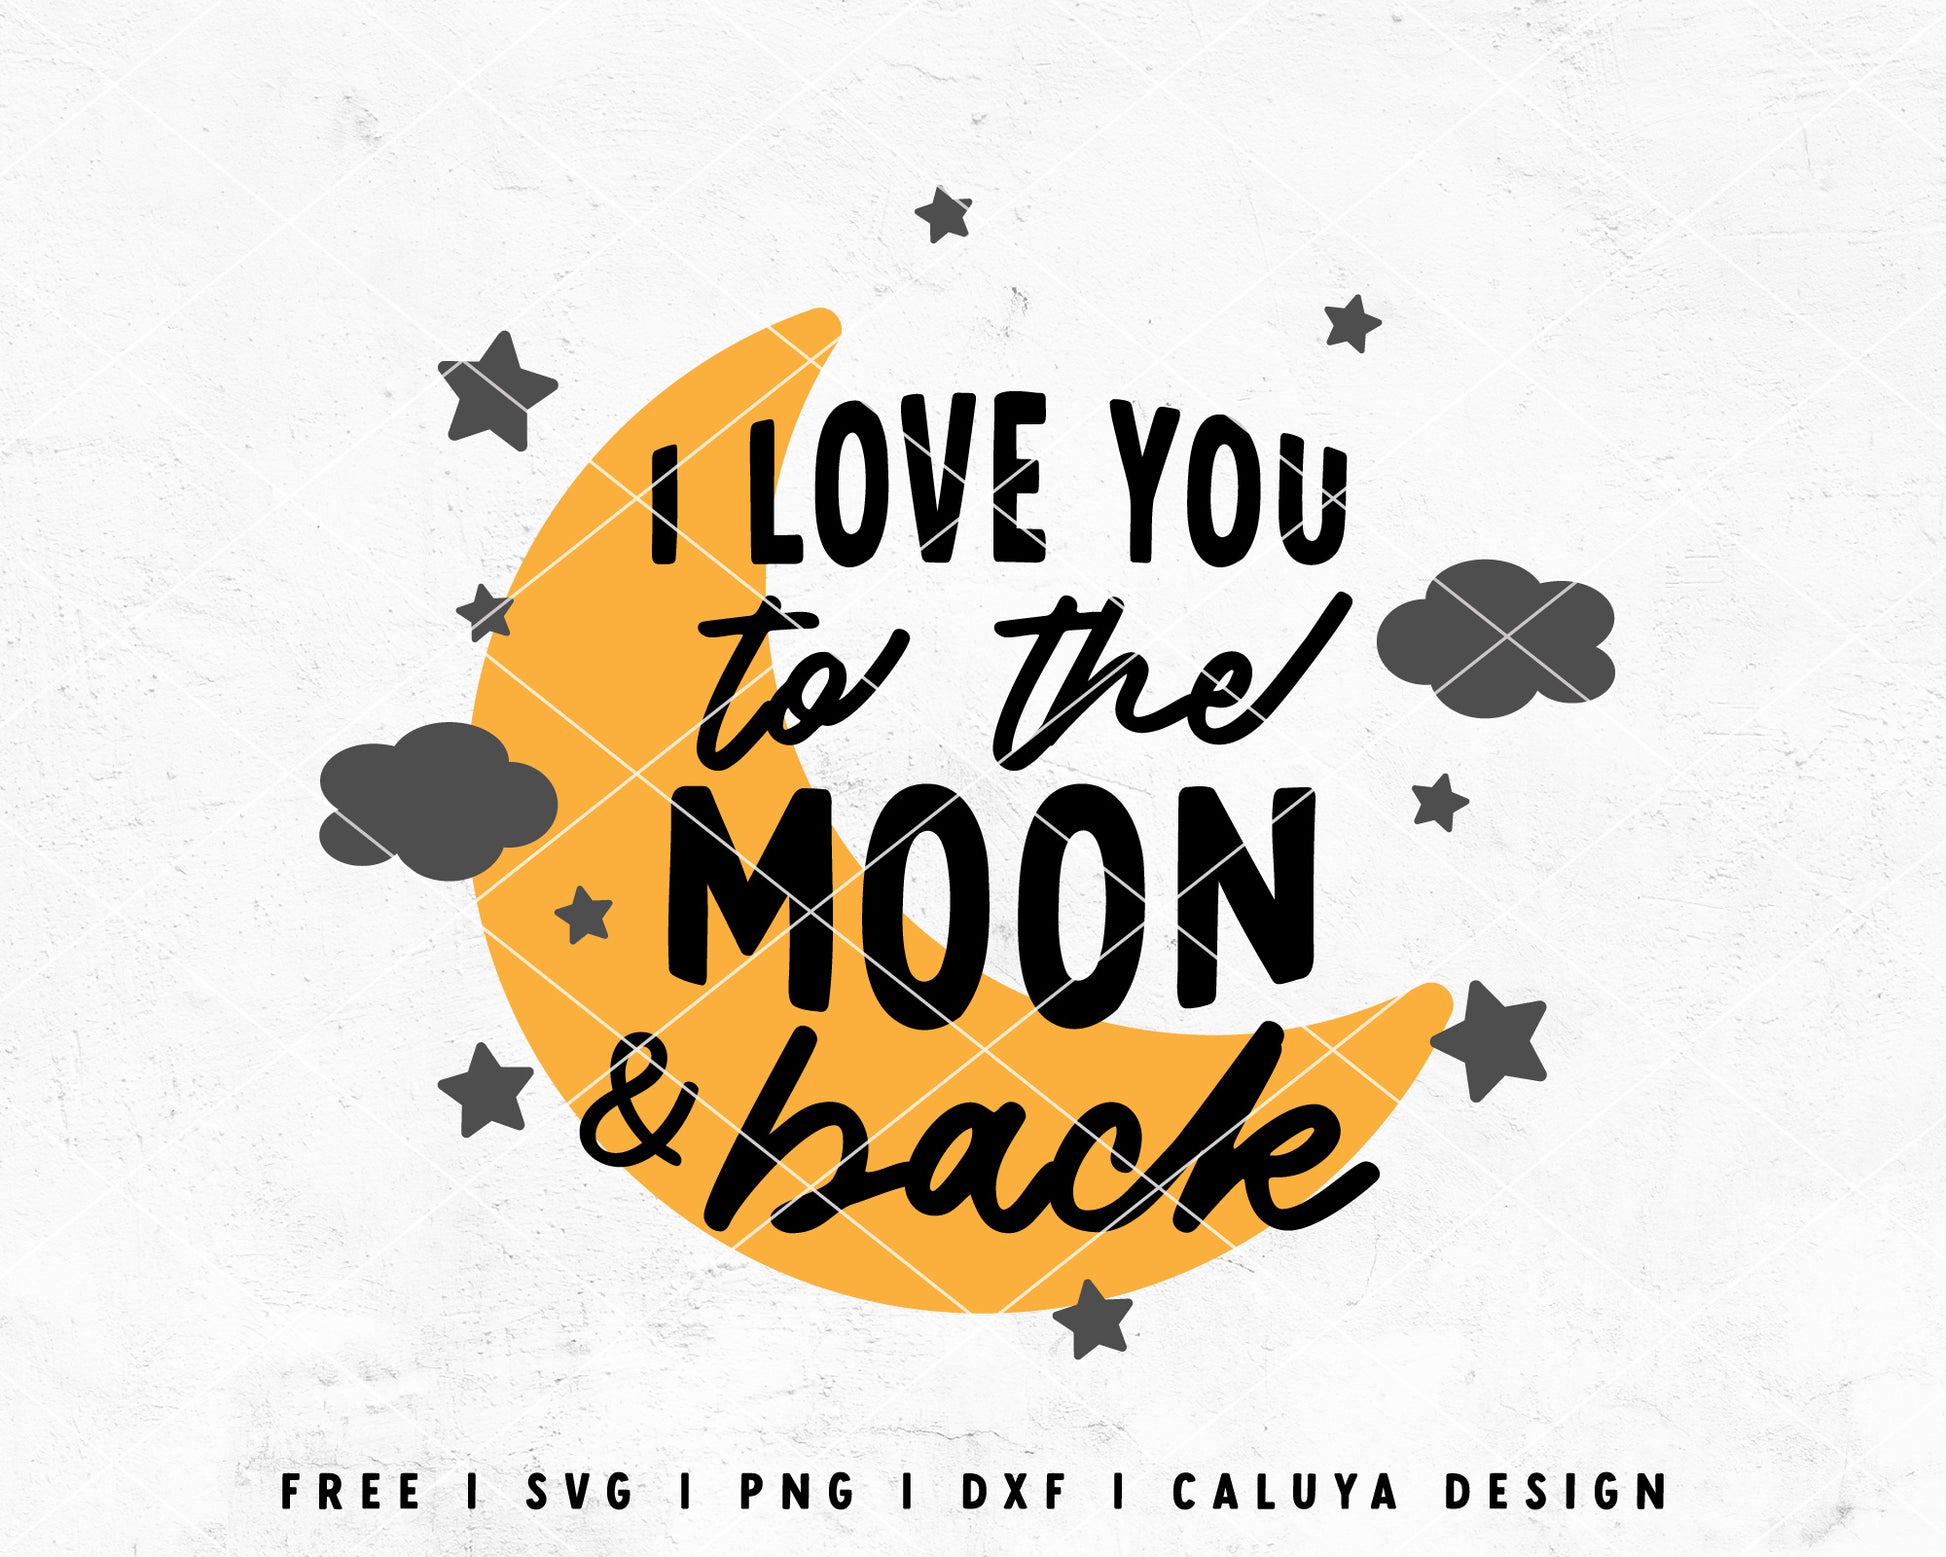 FREE Moon and Back SVG | Funny Quote SVG Cut File for Cricut, Cameo Silhouette | Free SVG Cut File